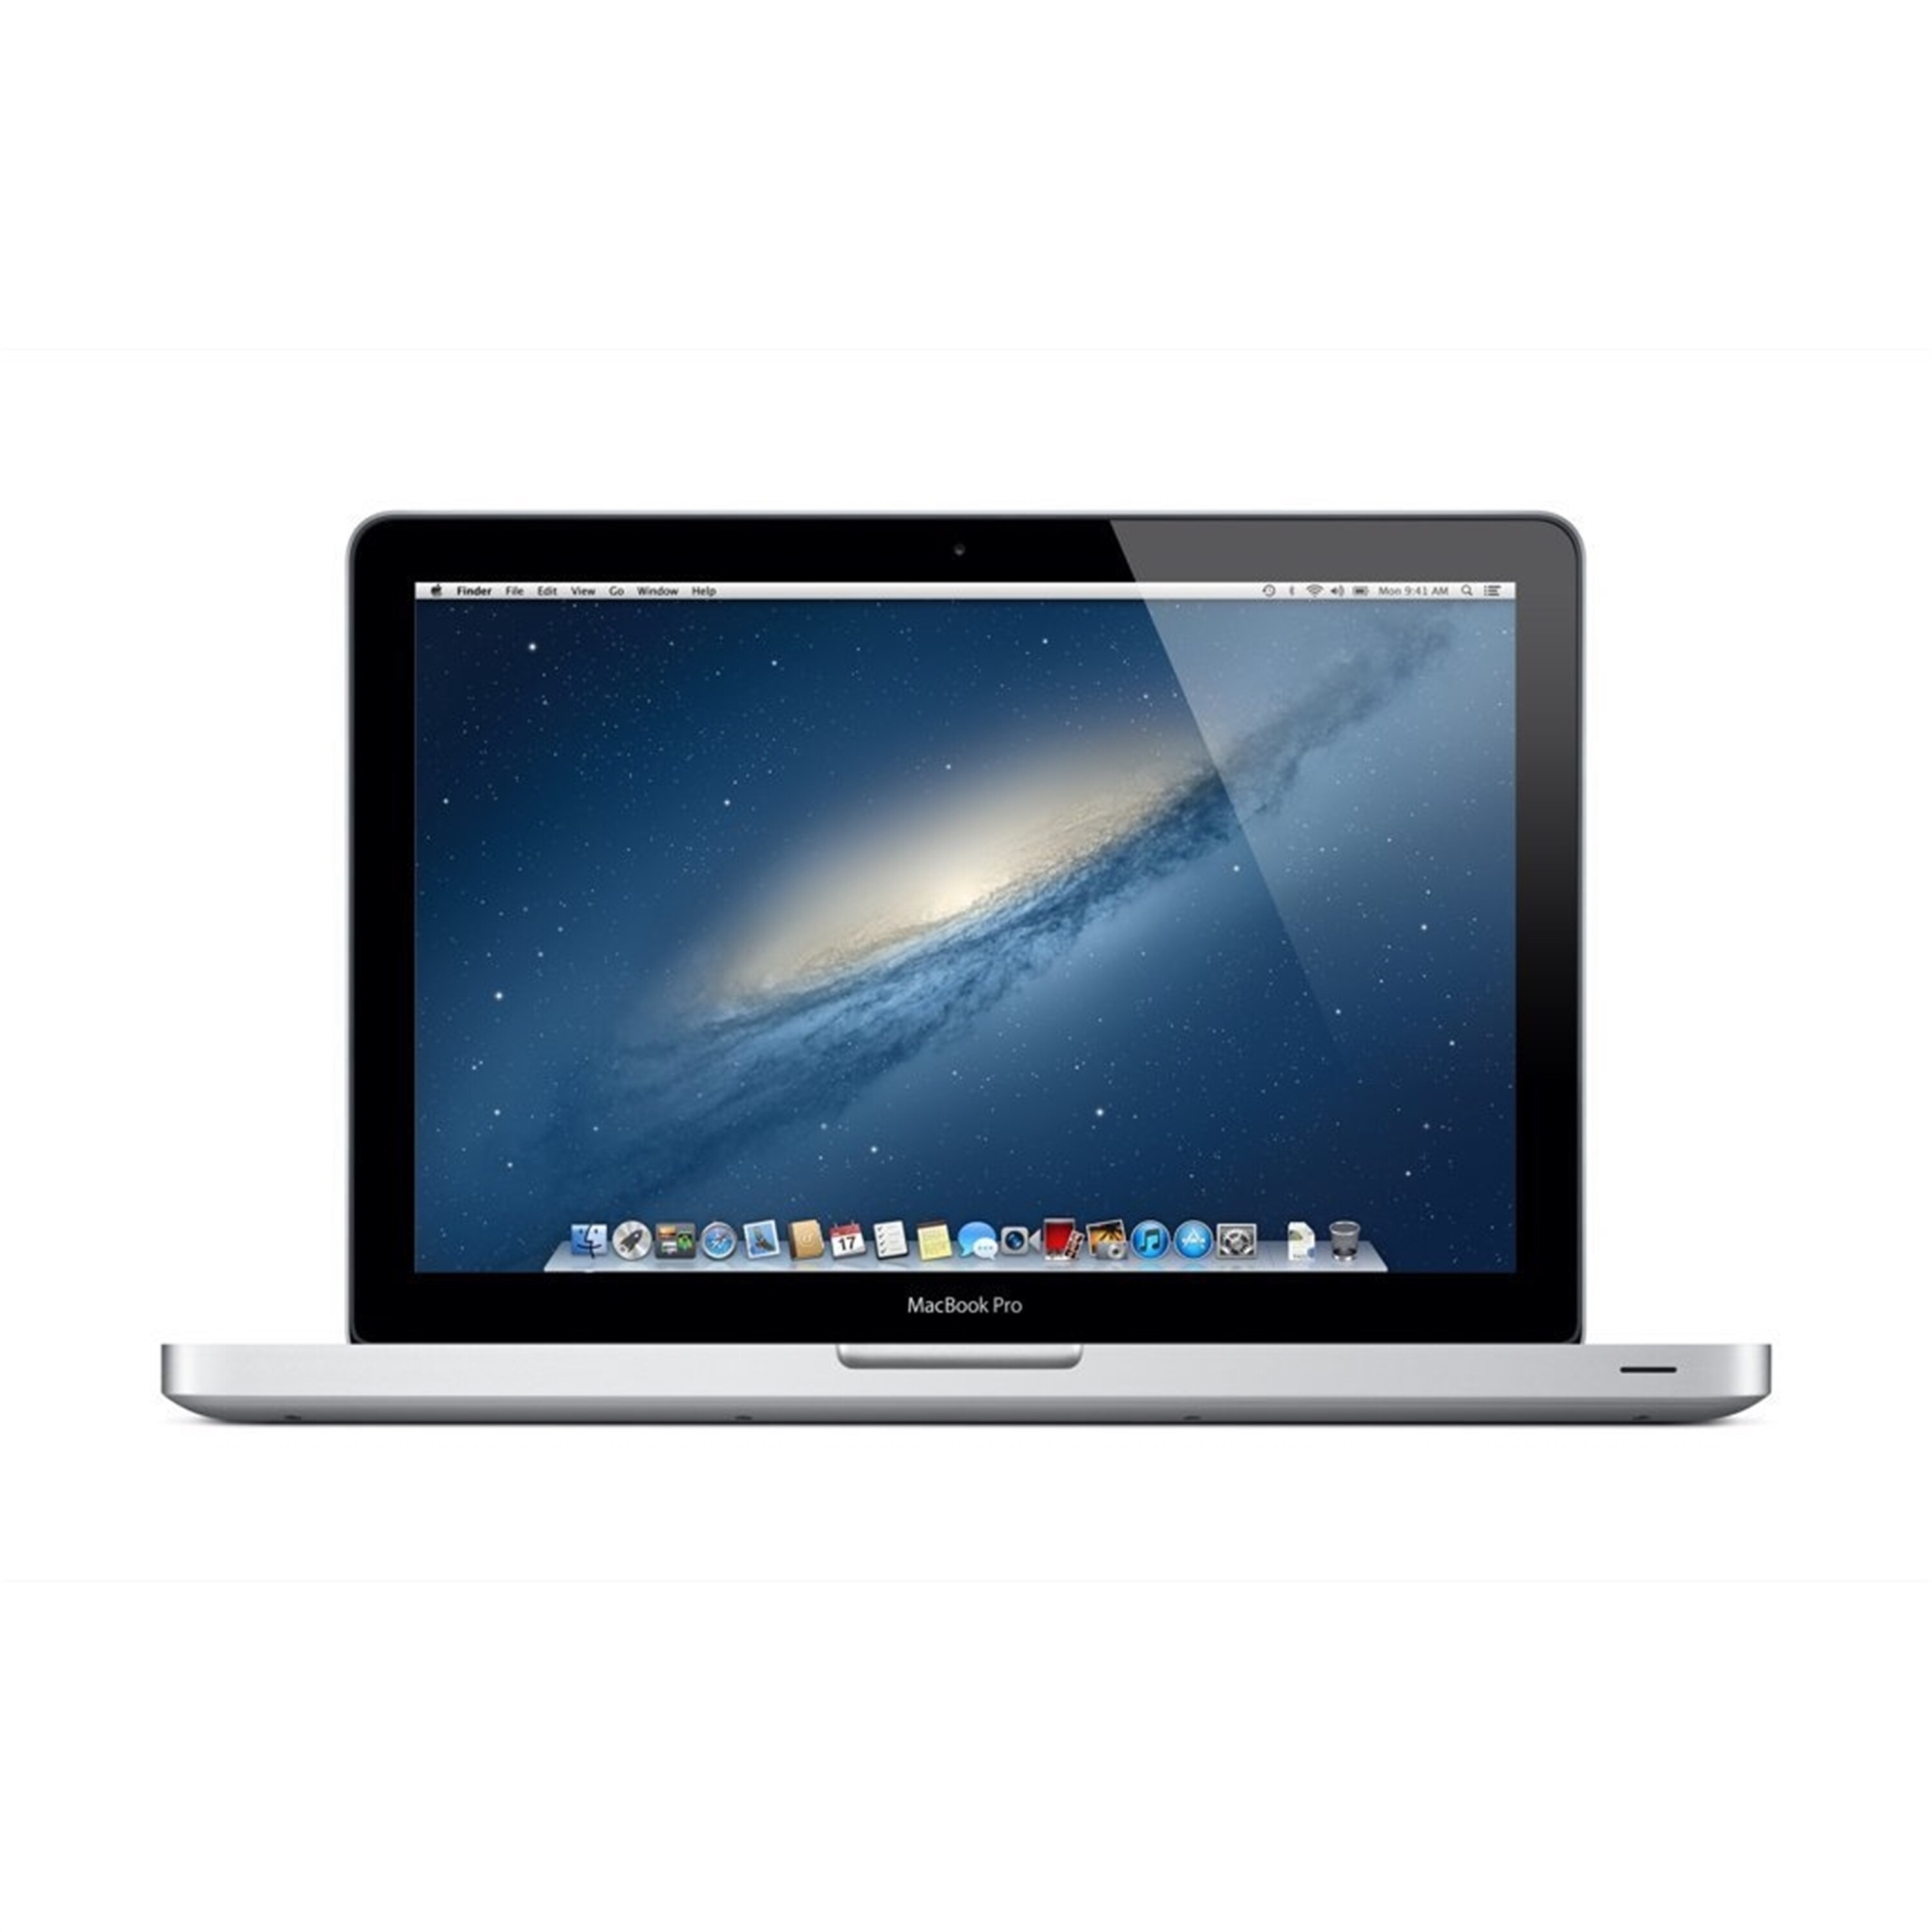 Apple MacBook Pro MD101LL/A Intel Core i5-3210M X2 2.5GHz 4GB 500GB 13.3", Silver (Refurbished) - Not Specified